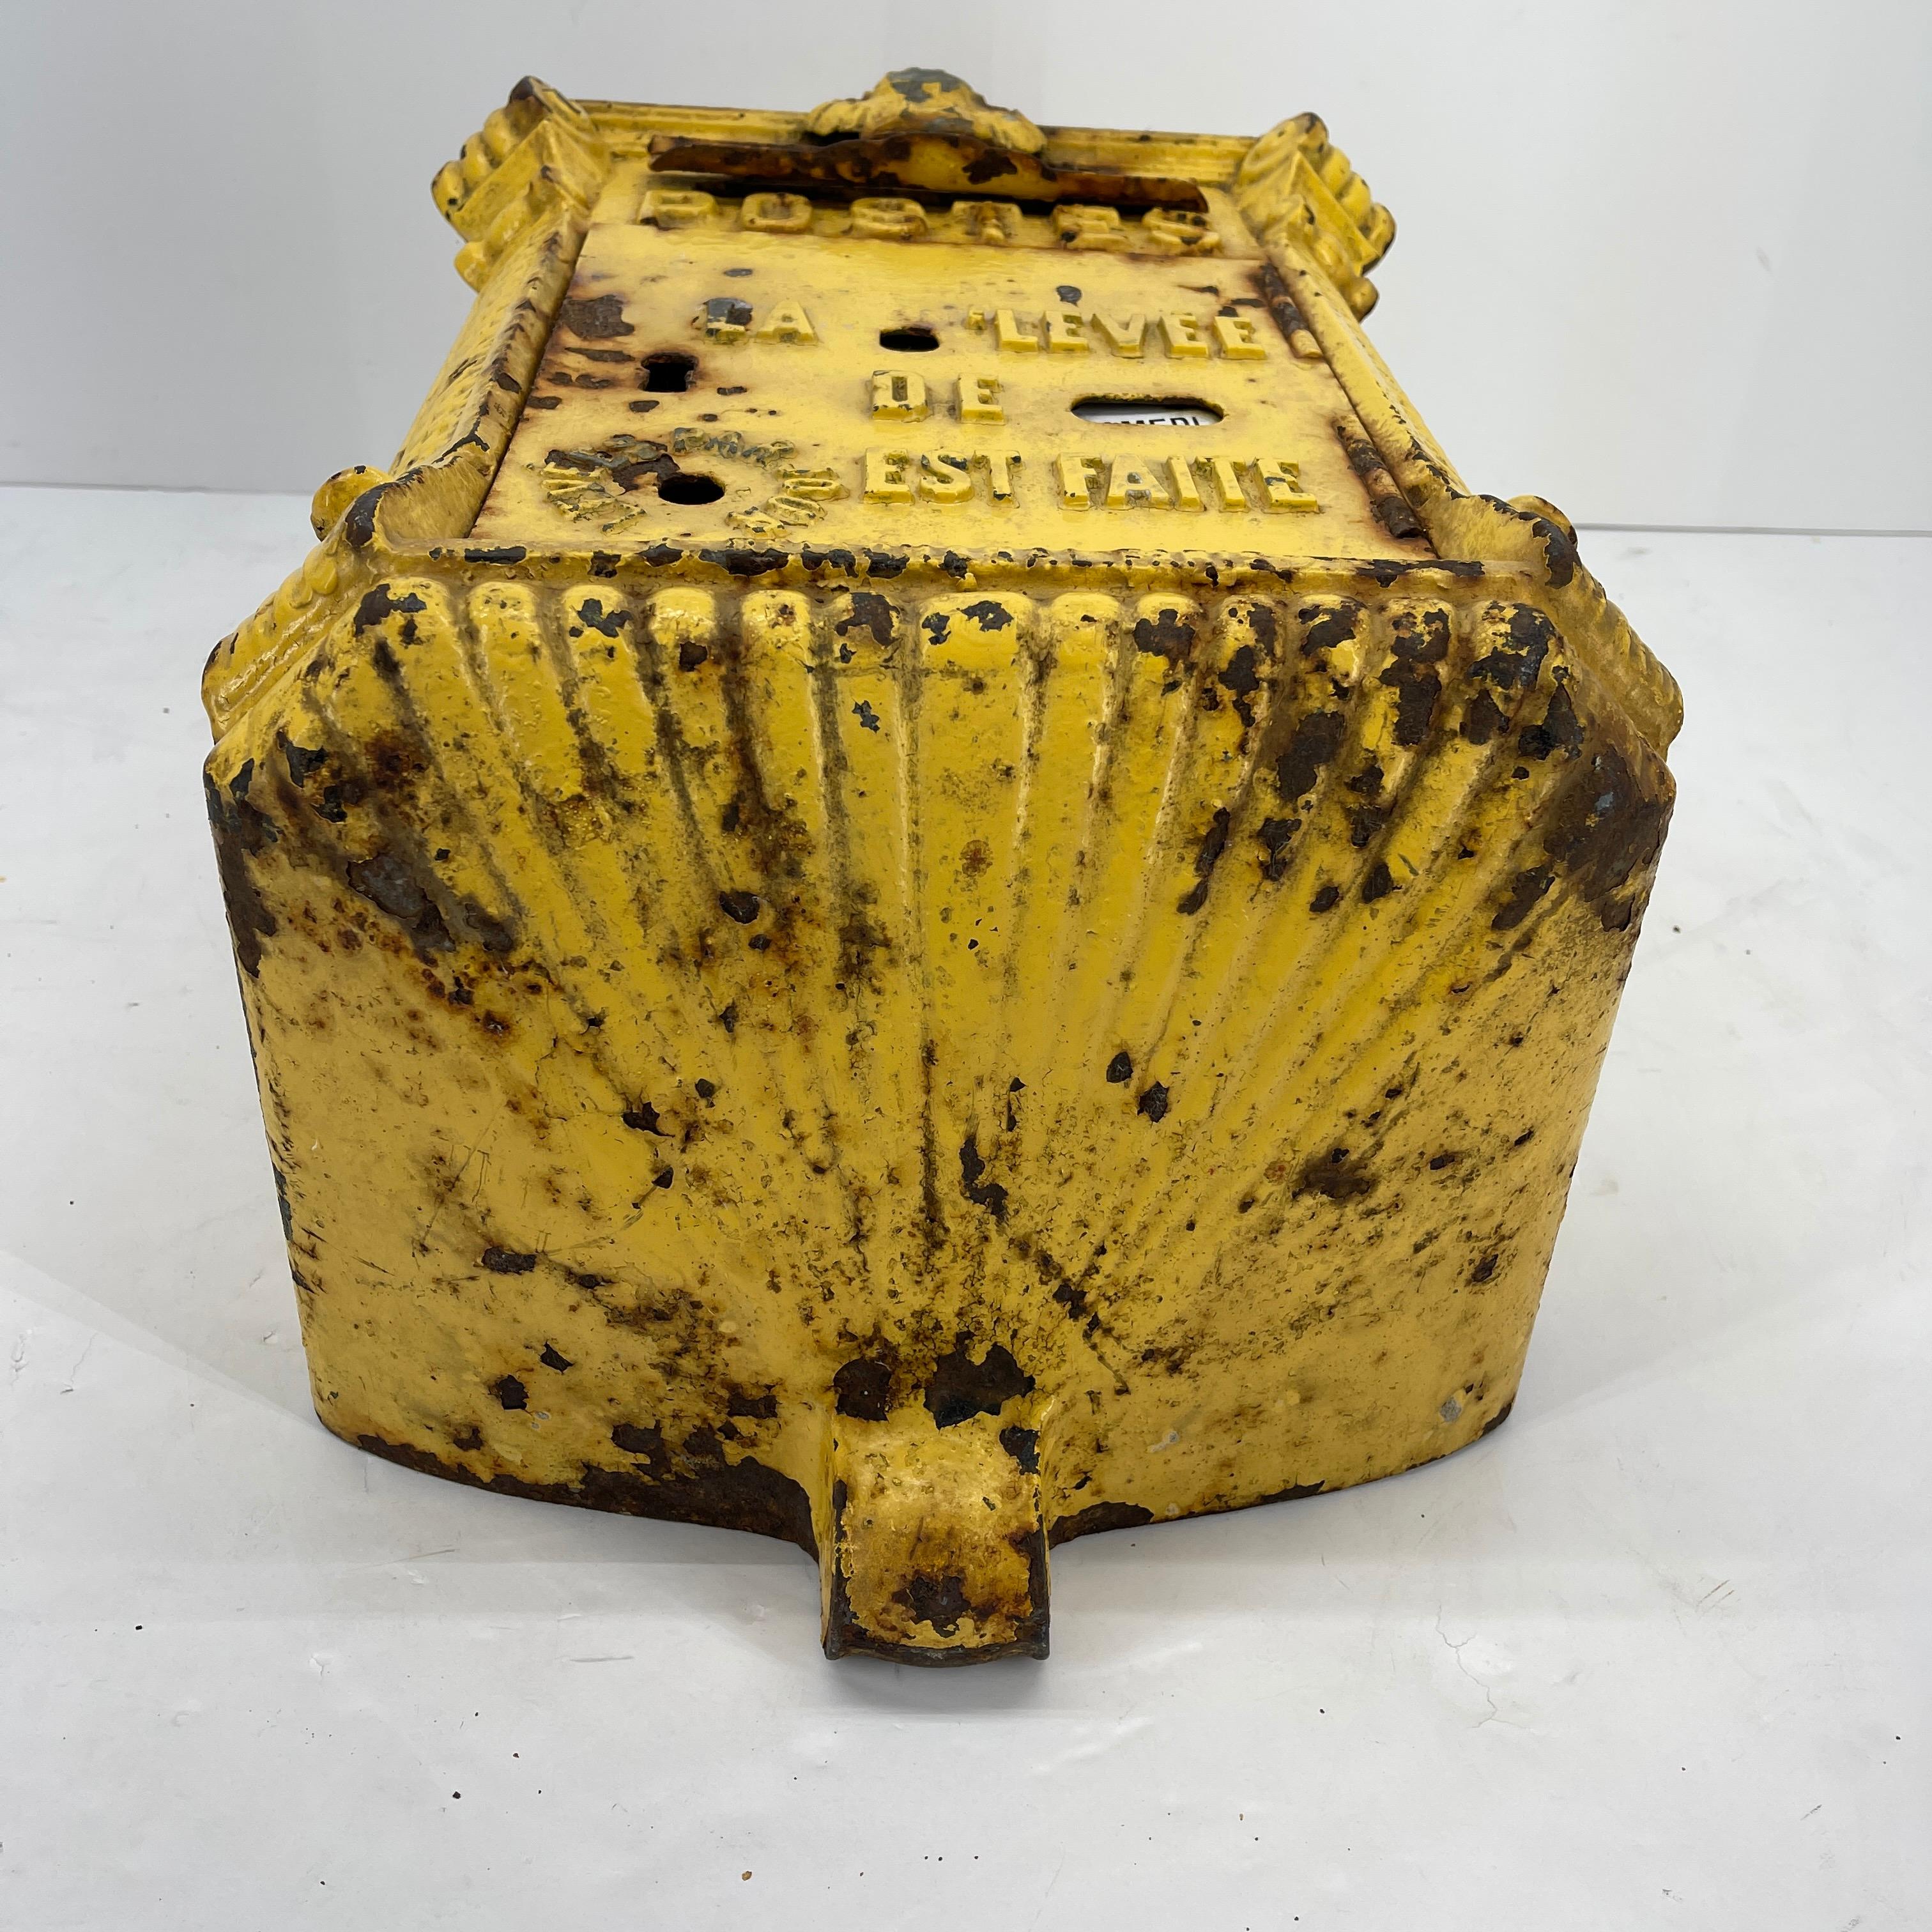 Antique Yellow Cast Iron French Mailbox.
This rare treasure is dated early 1900s-1930s. Cast iron and steel was used in the manufacturing process of mail boxes, beginning circa 1900 in France. They became known as “Mougeottes” after their founder.